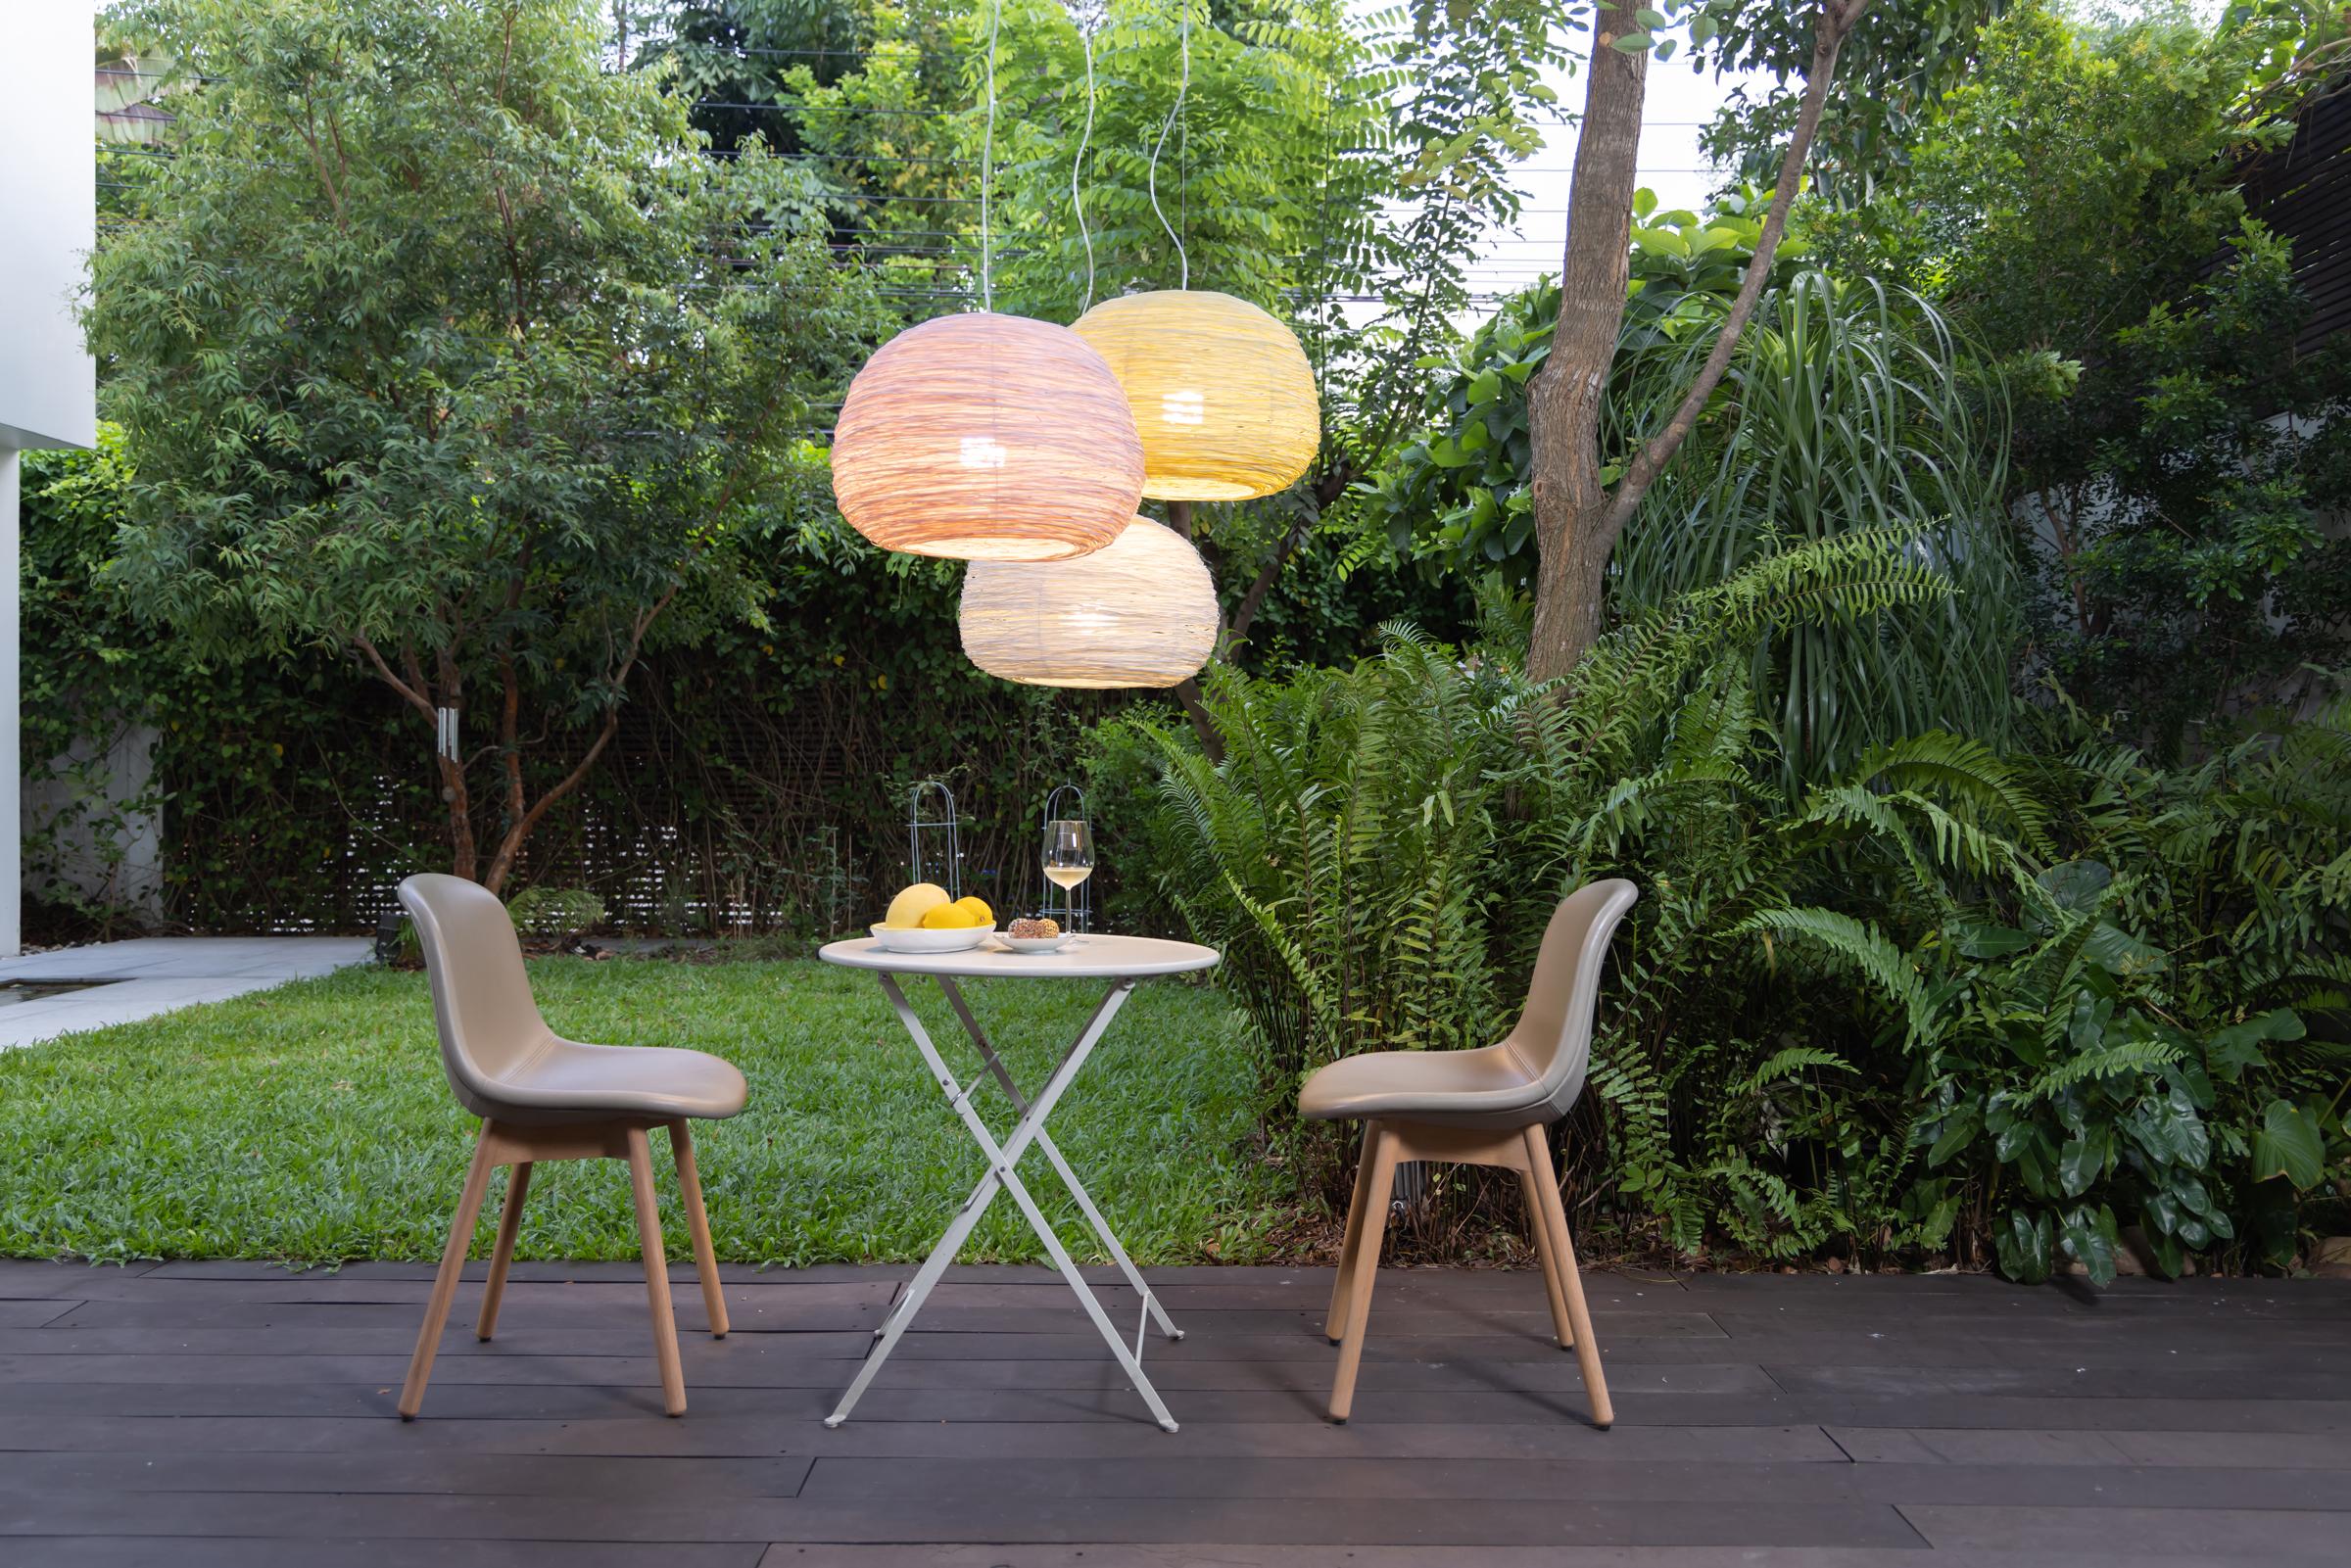 Shelter pendant by Ango, Hand-Woven Semi-Outdoor Pendant Light  In New Condition For Sale In Bangkok, TH